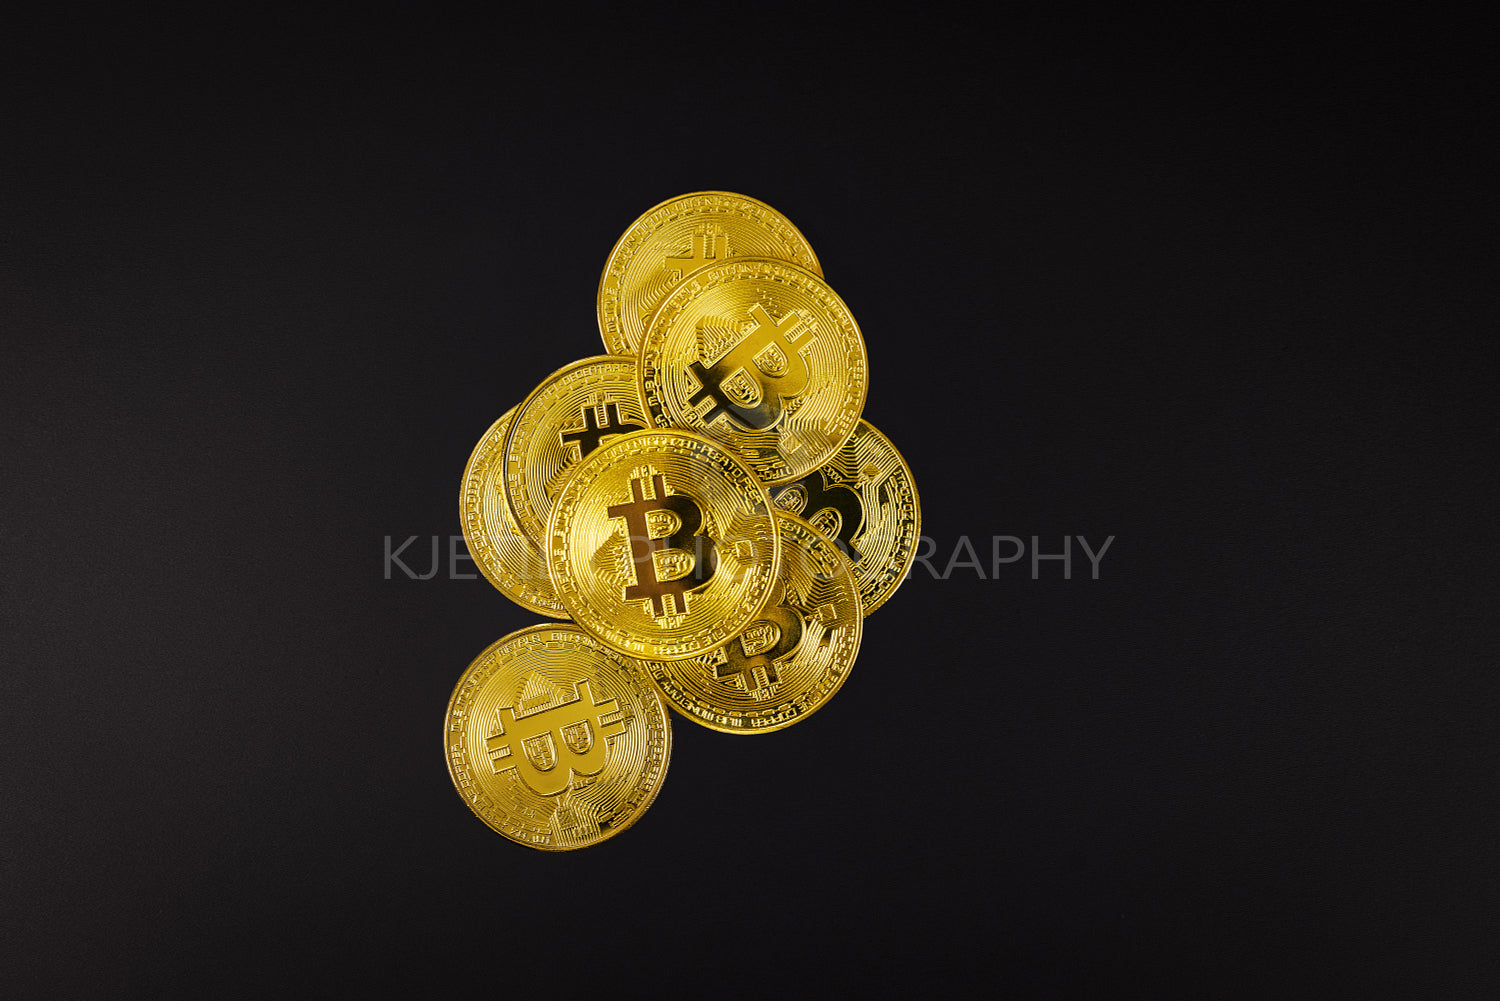 Bitcoin coin on top of various golden cryptocurrencies